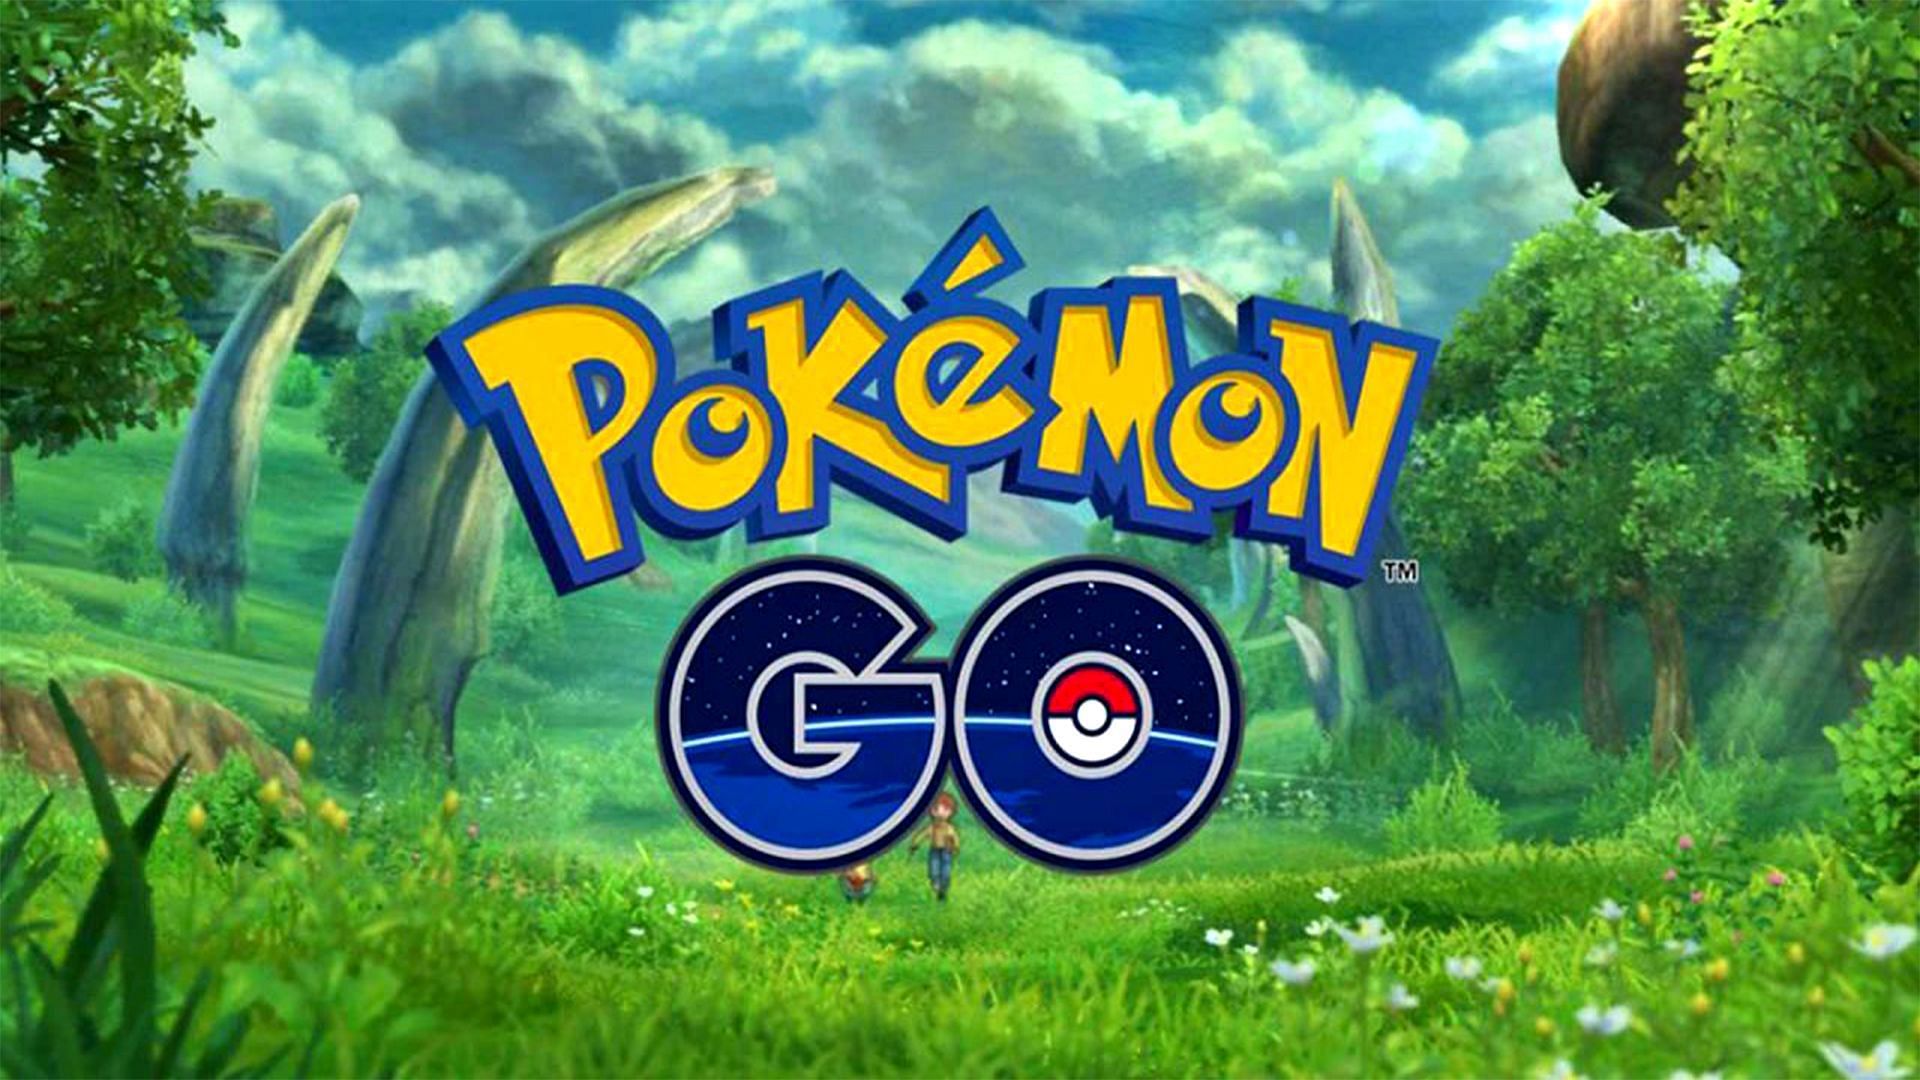 Pokemon GO Quality of life Updates that players want in the game (Image via Niantic)